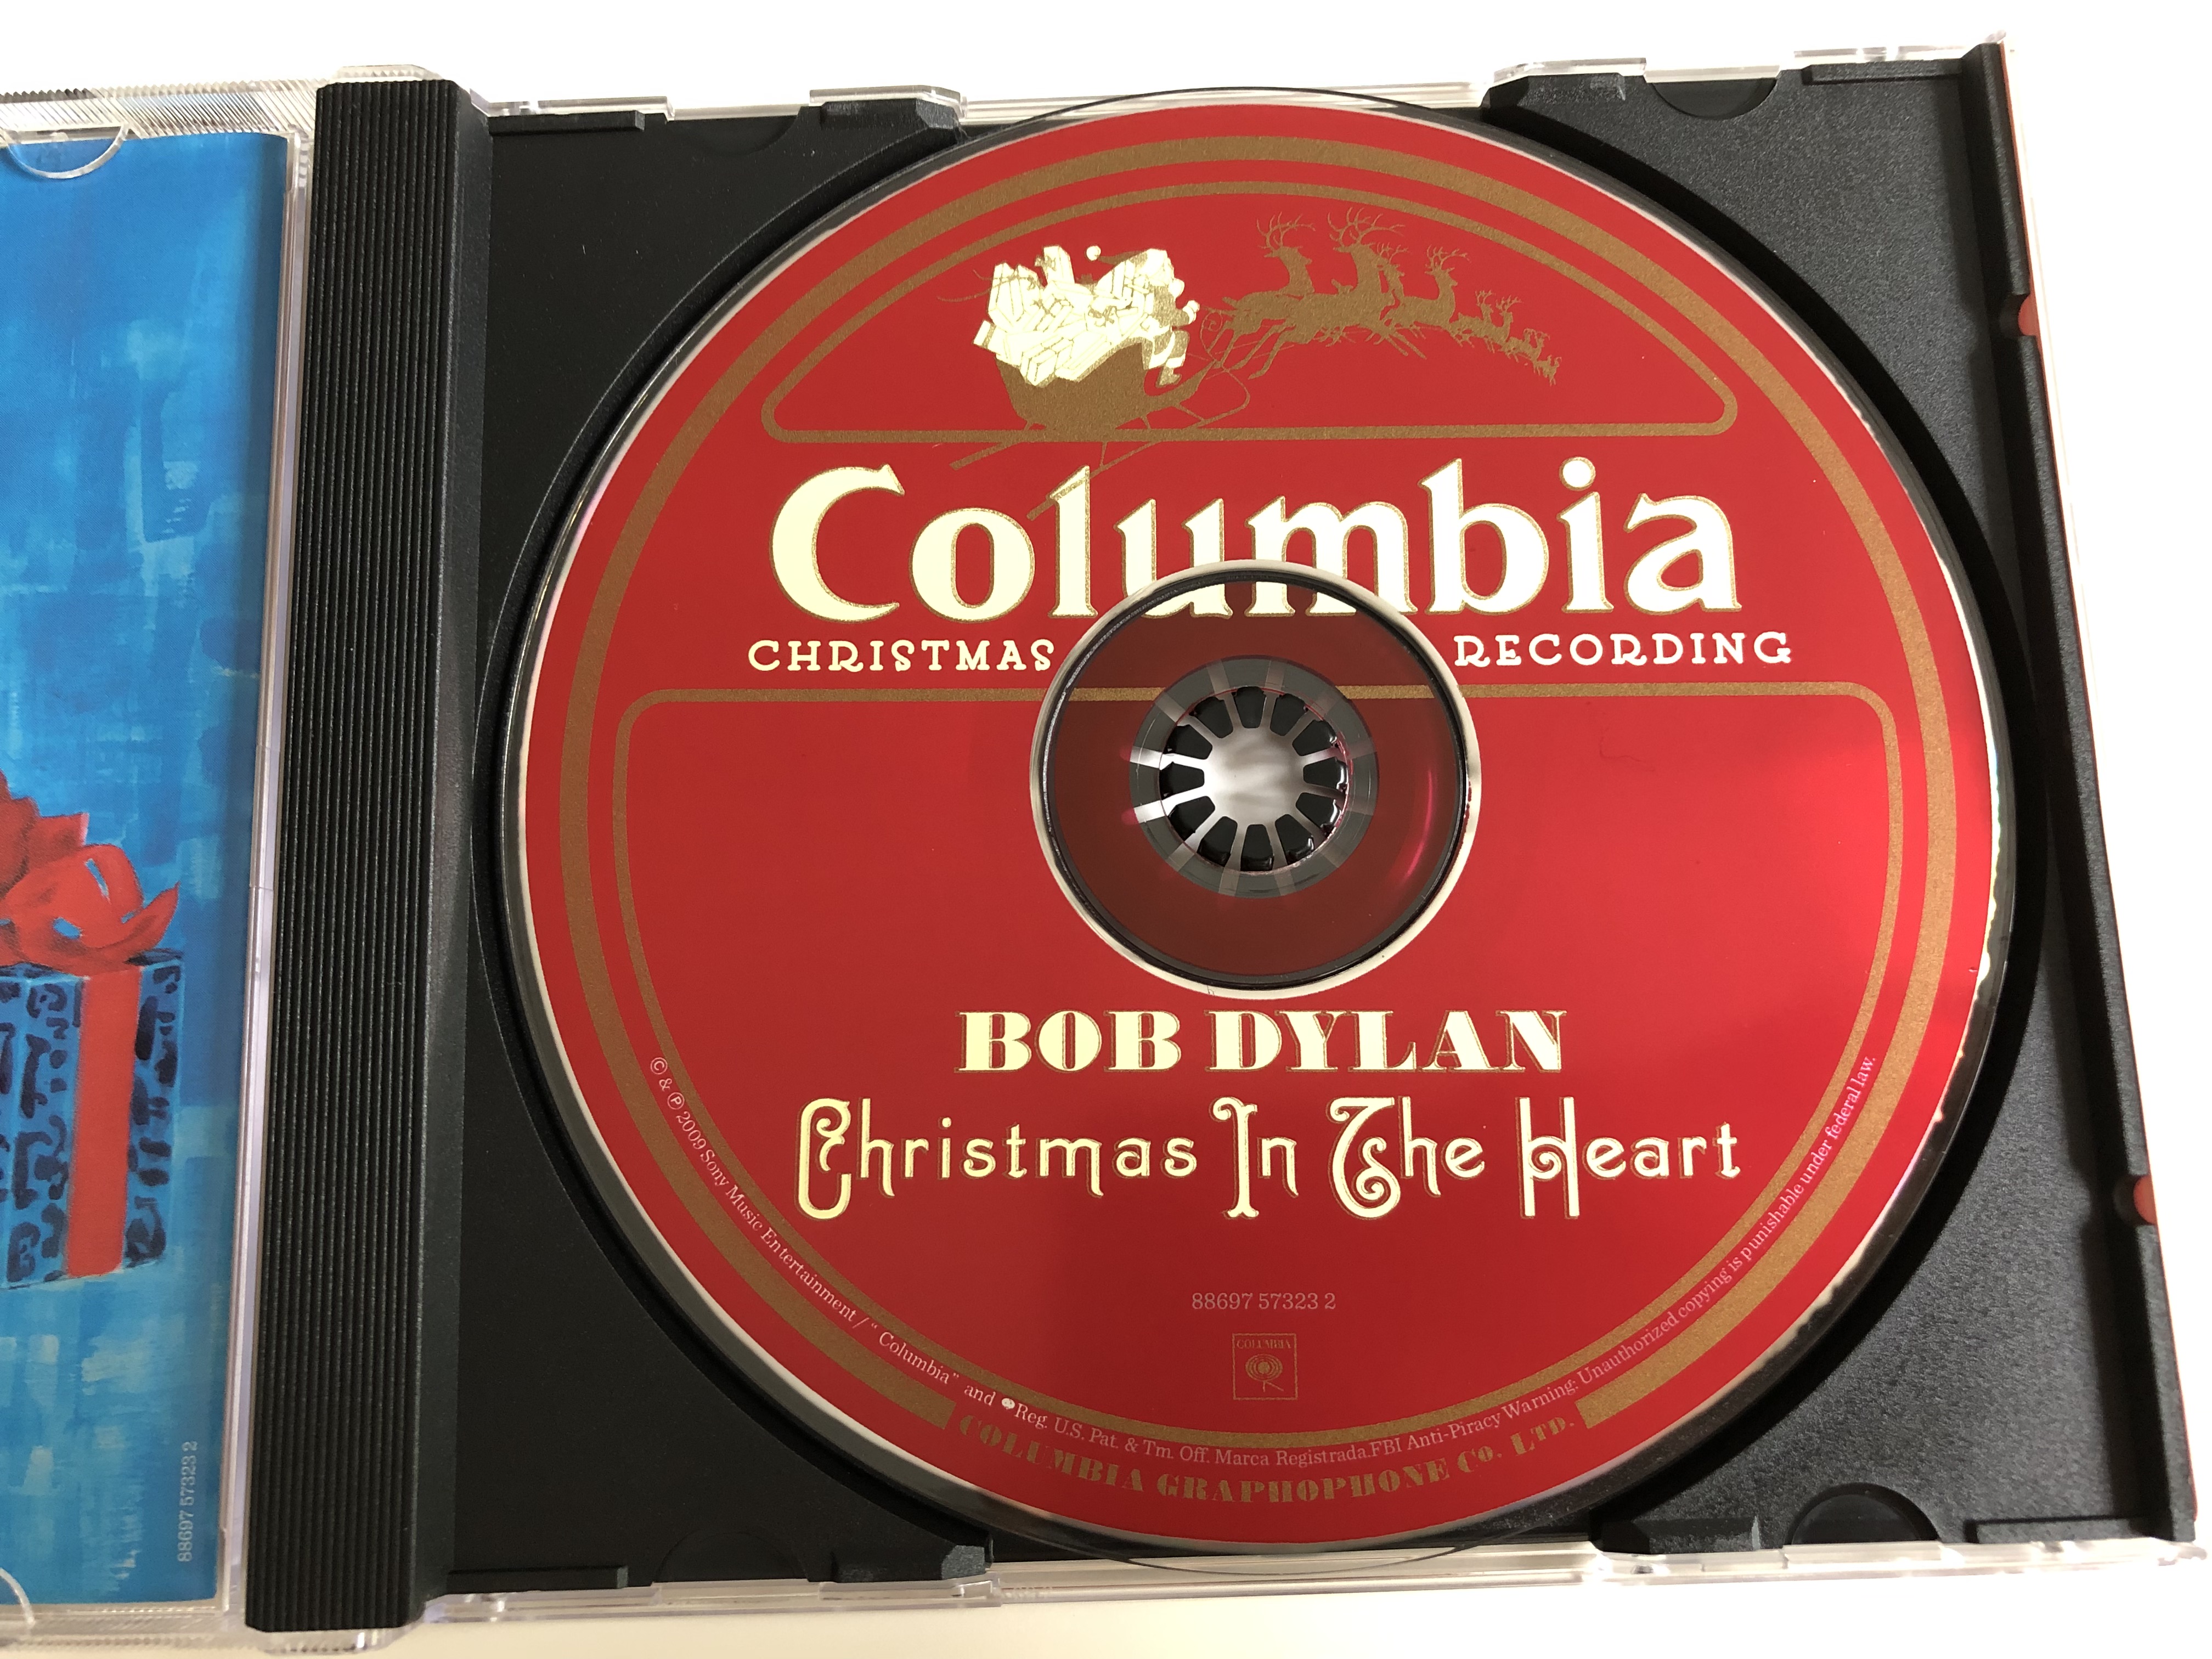 bob-dylan-christmas-in-the-heart-audio-cd-2009-do-you-hear-what-i-hear-hark-the-herald-angels-sing-the-christmas-blues-o-come-all-ye-faithful-adeste-fideles-columbia-records-4-.jpg